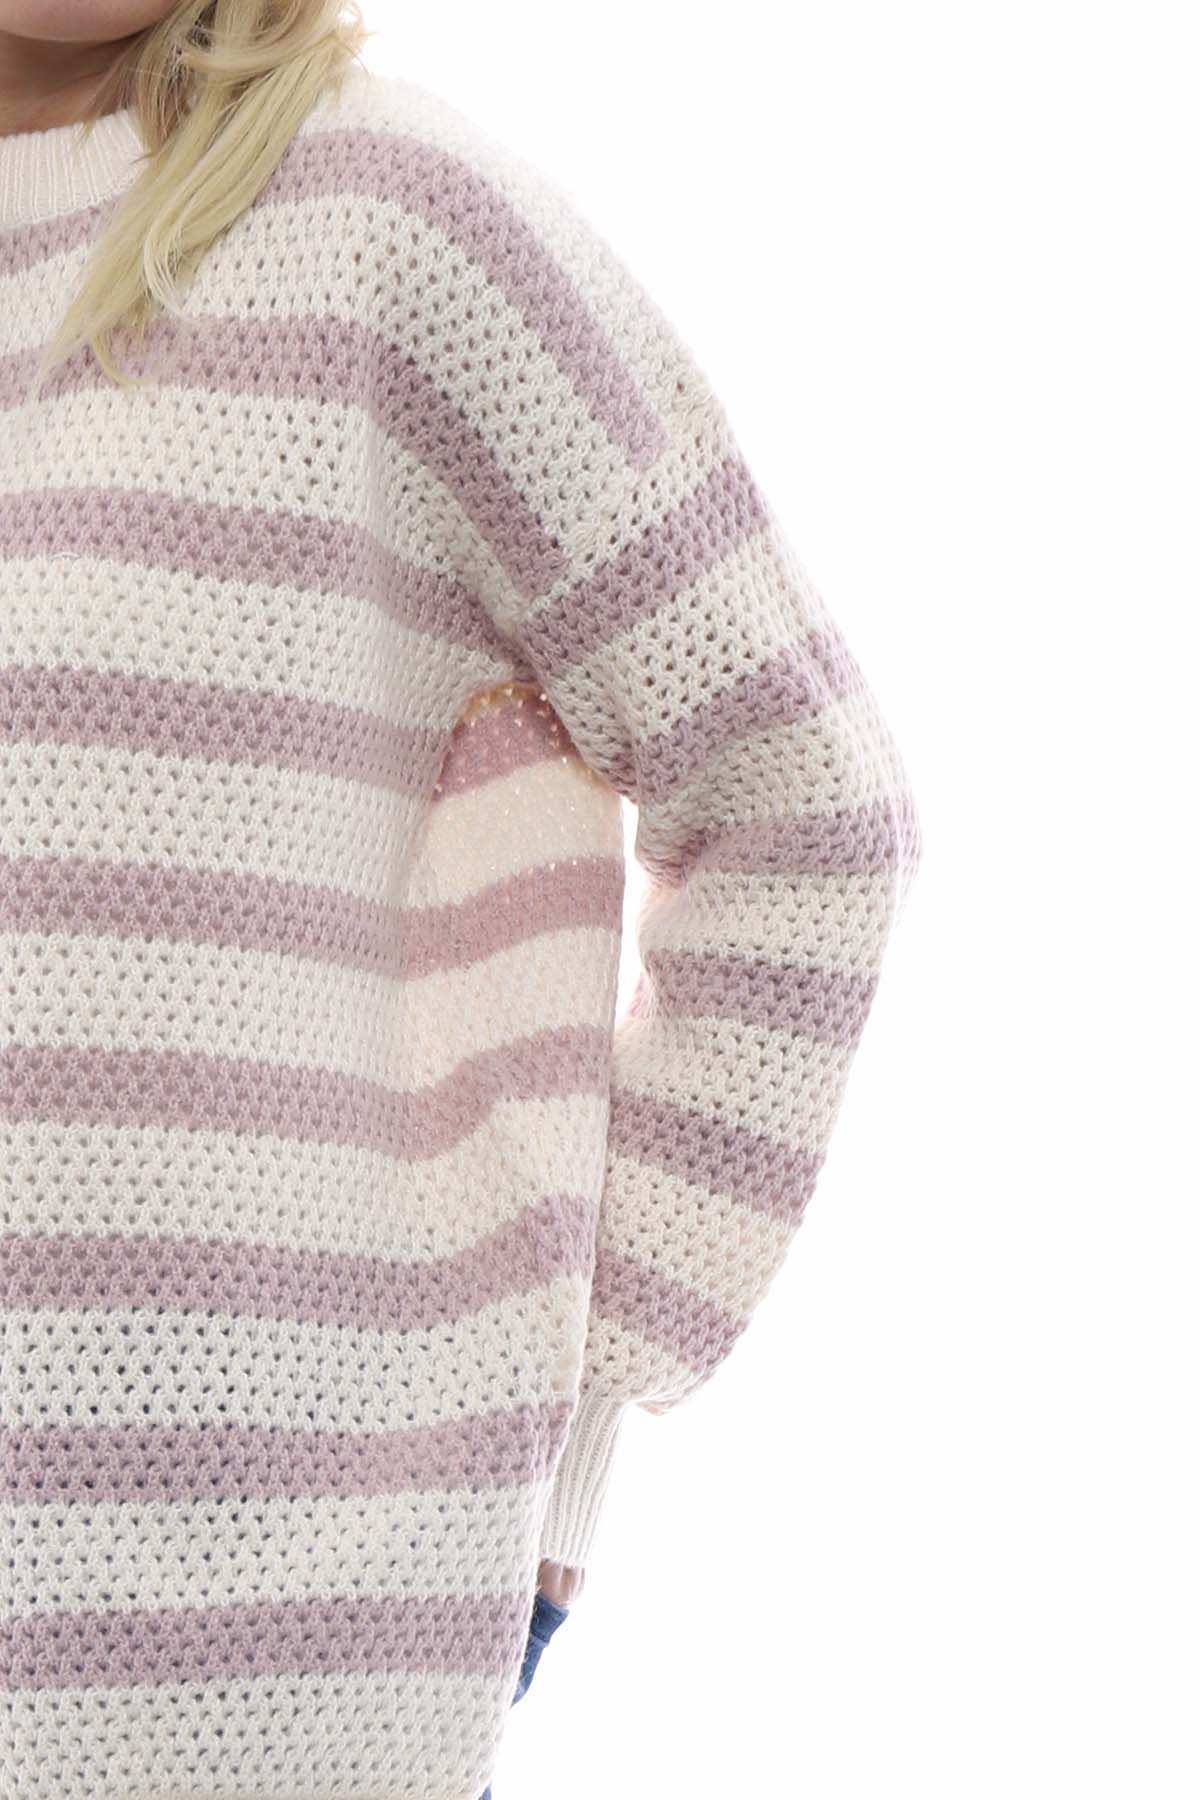 Romary Stripe Knitted Jumper Pink